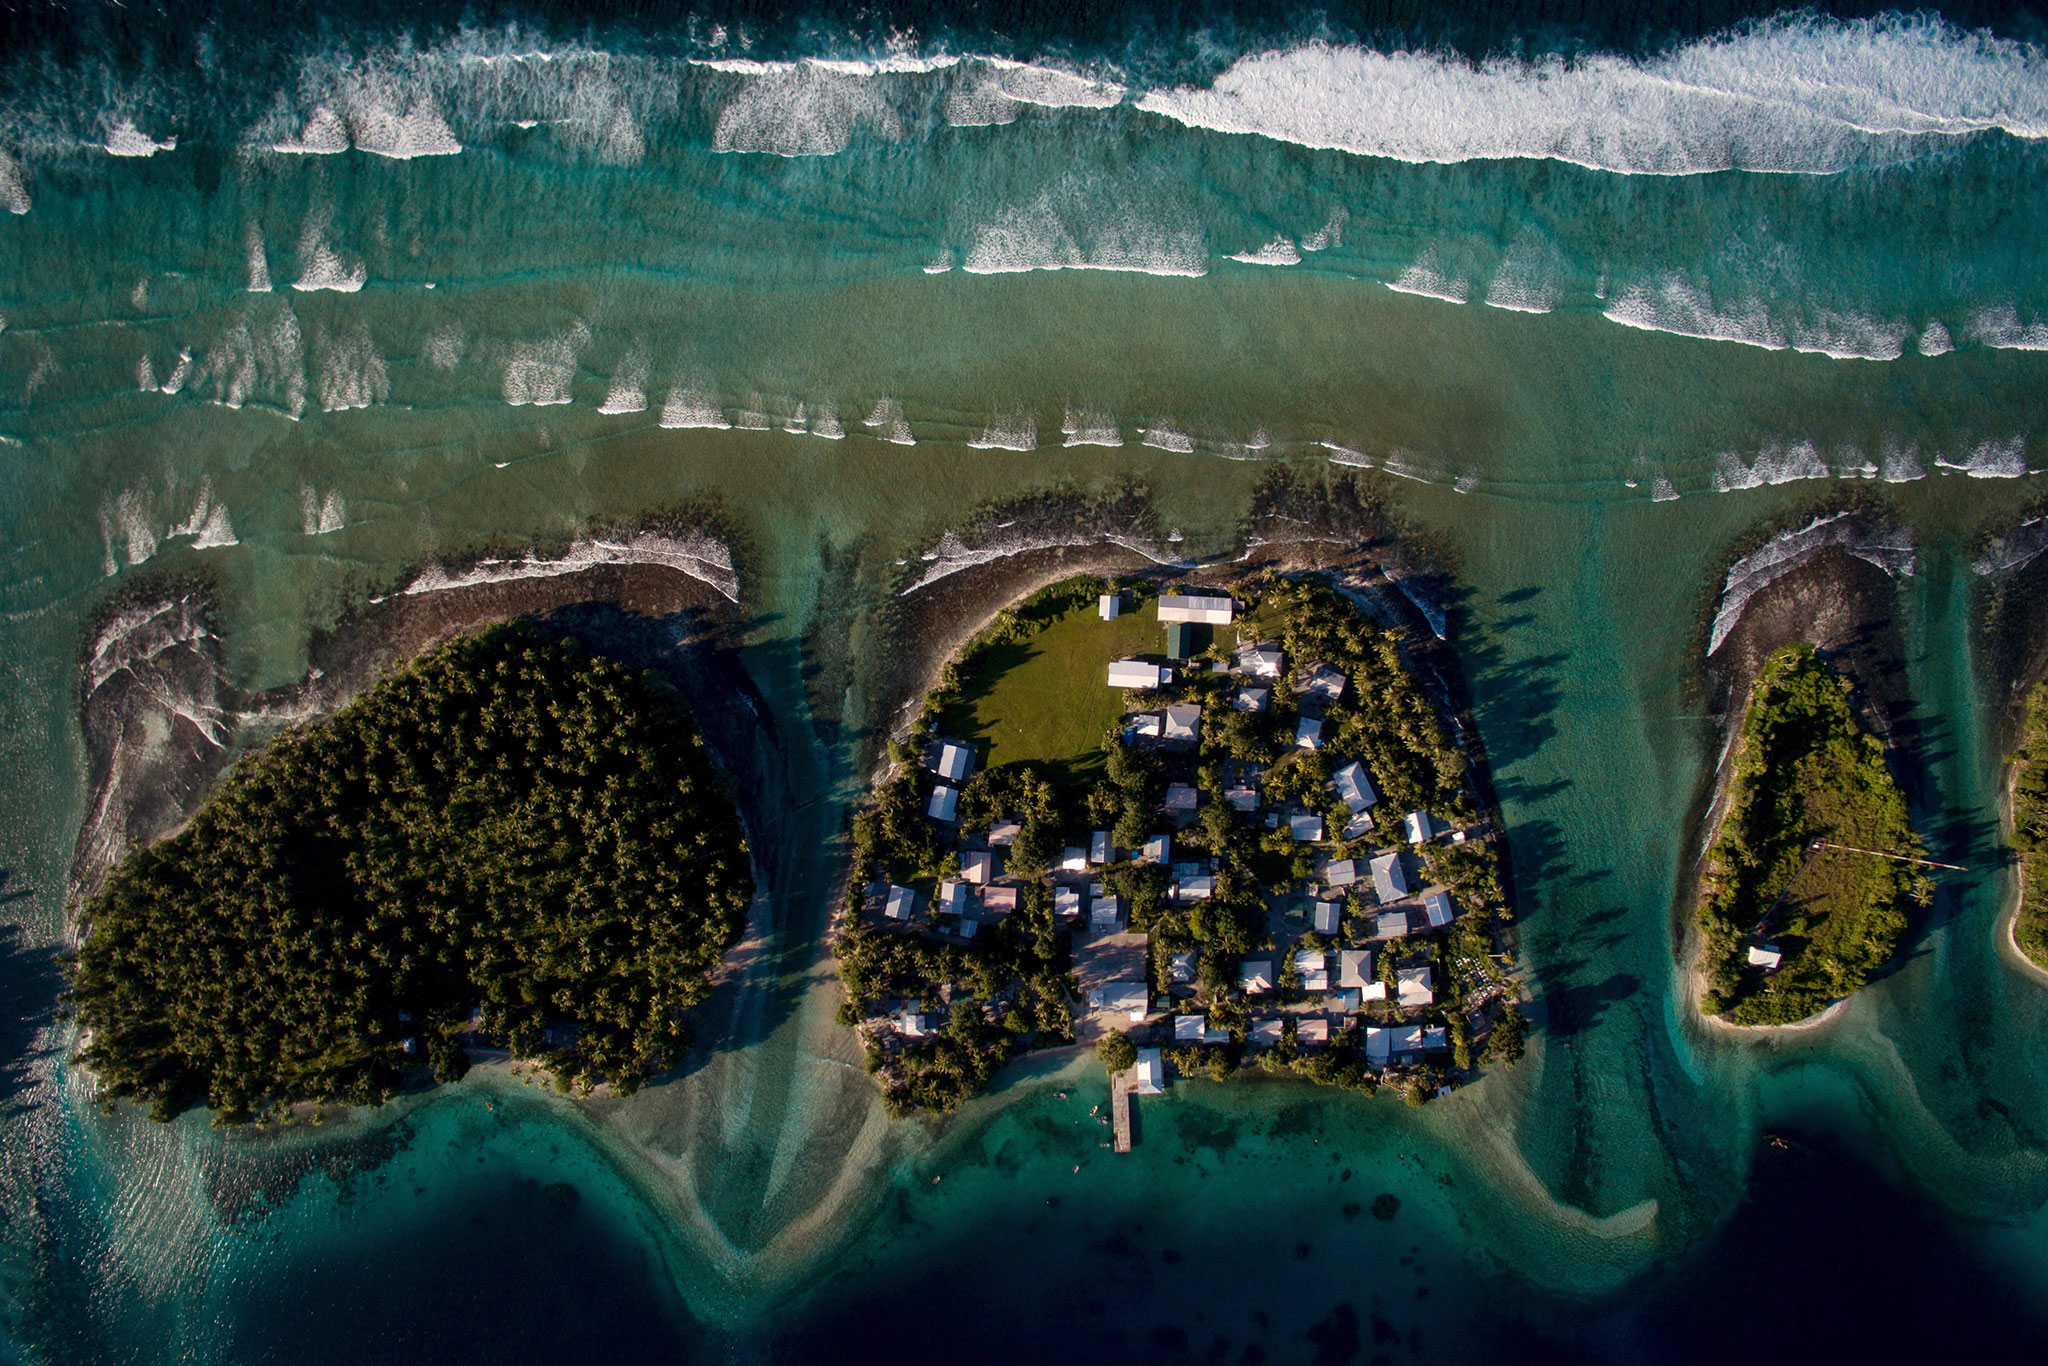 The Marshall Islands, including Majuro Atoll, rise on average only seven feet above sea level. With two other key U.S. partners in the Pacific, the Marshalls need urgent U.S. attention to rising seas and other challenges. (Josh Haner/The New York Times)